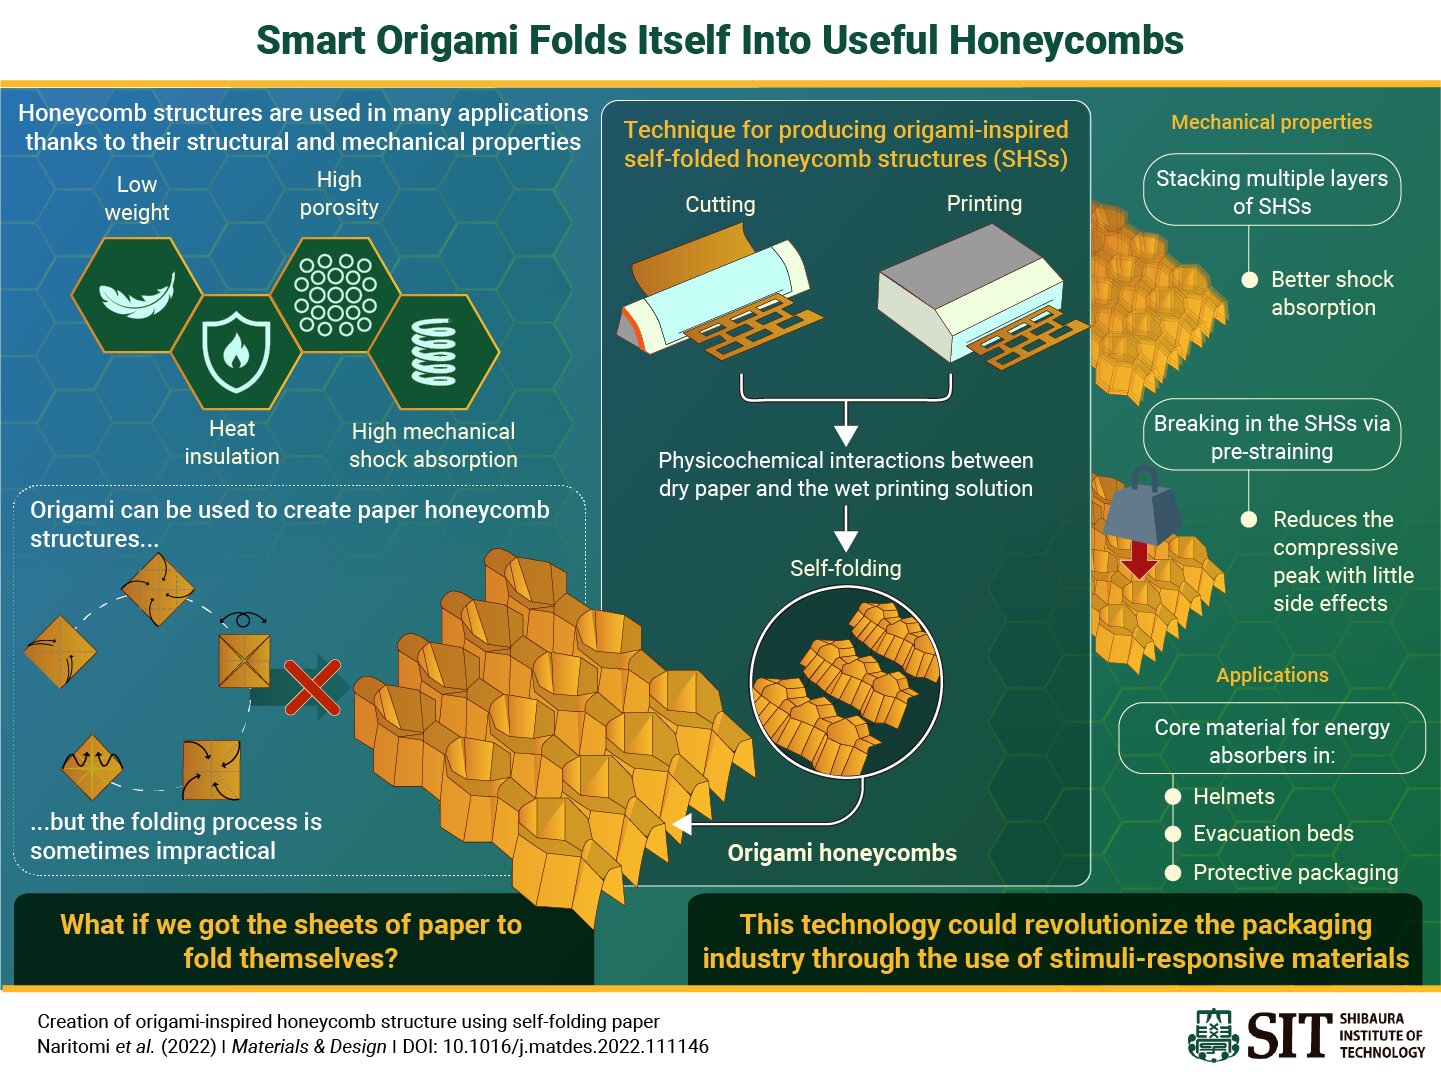 Self-folding origami honeycombs pave the way to sustainable protective packaging